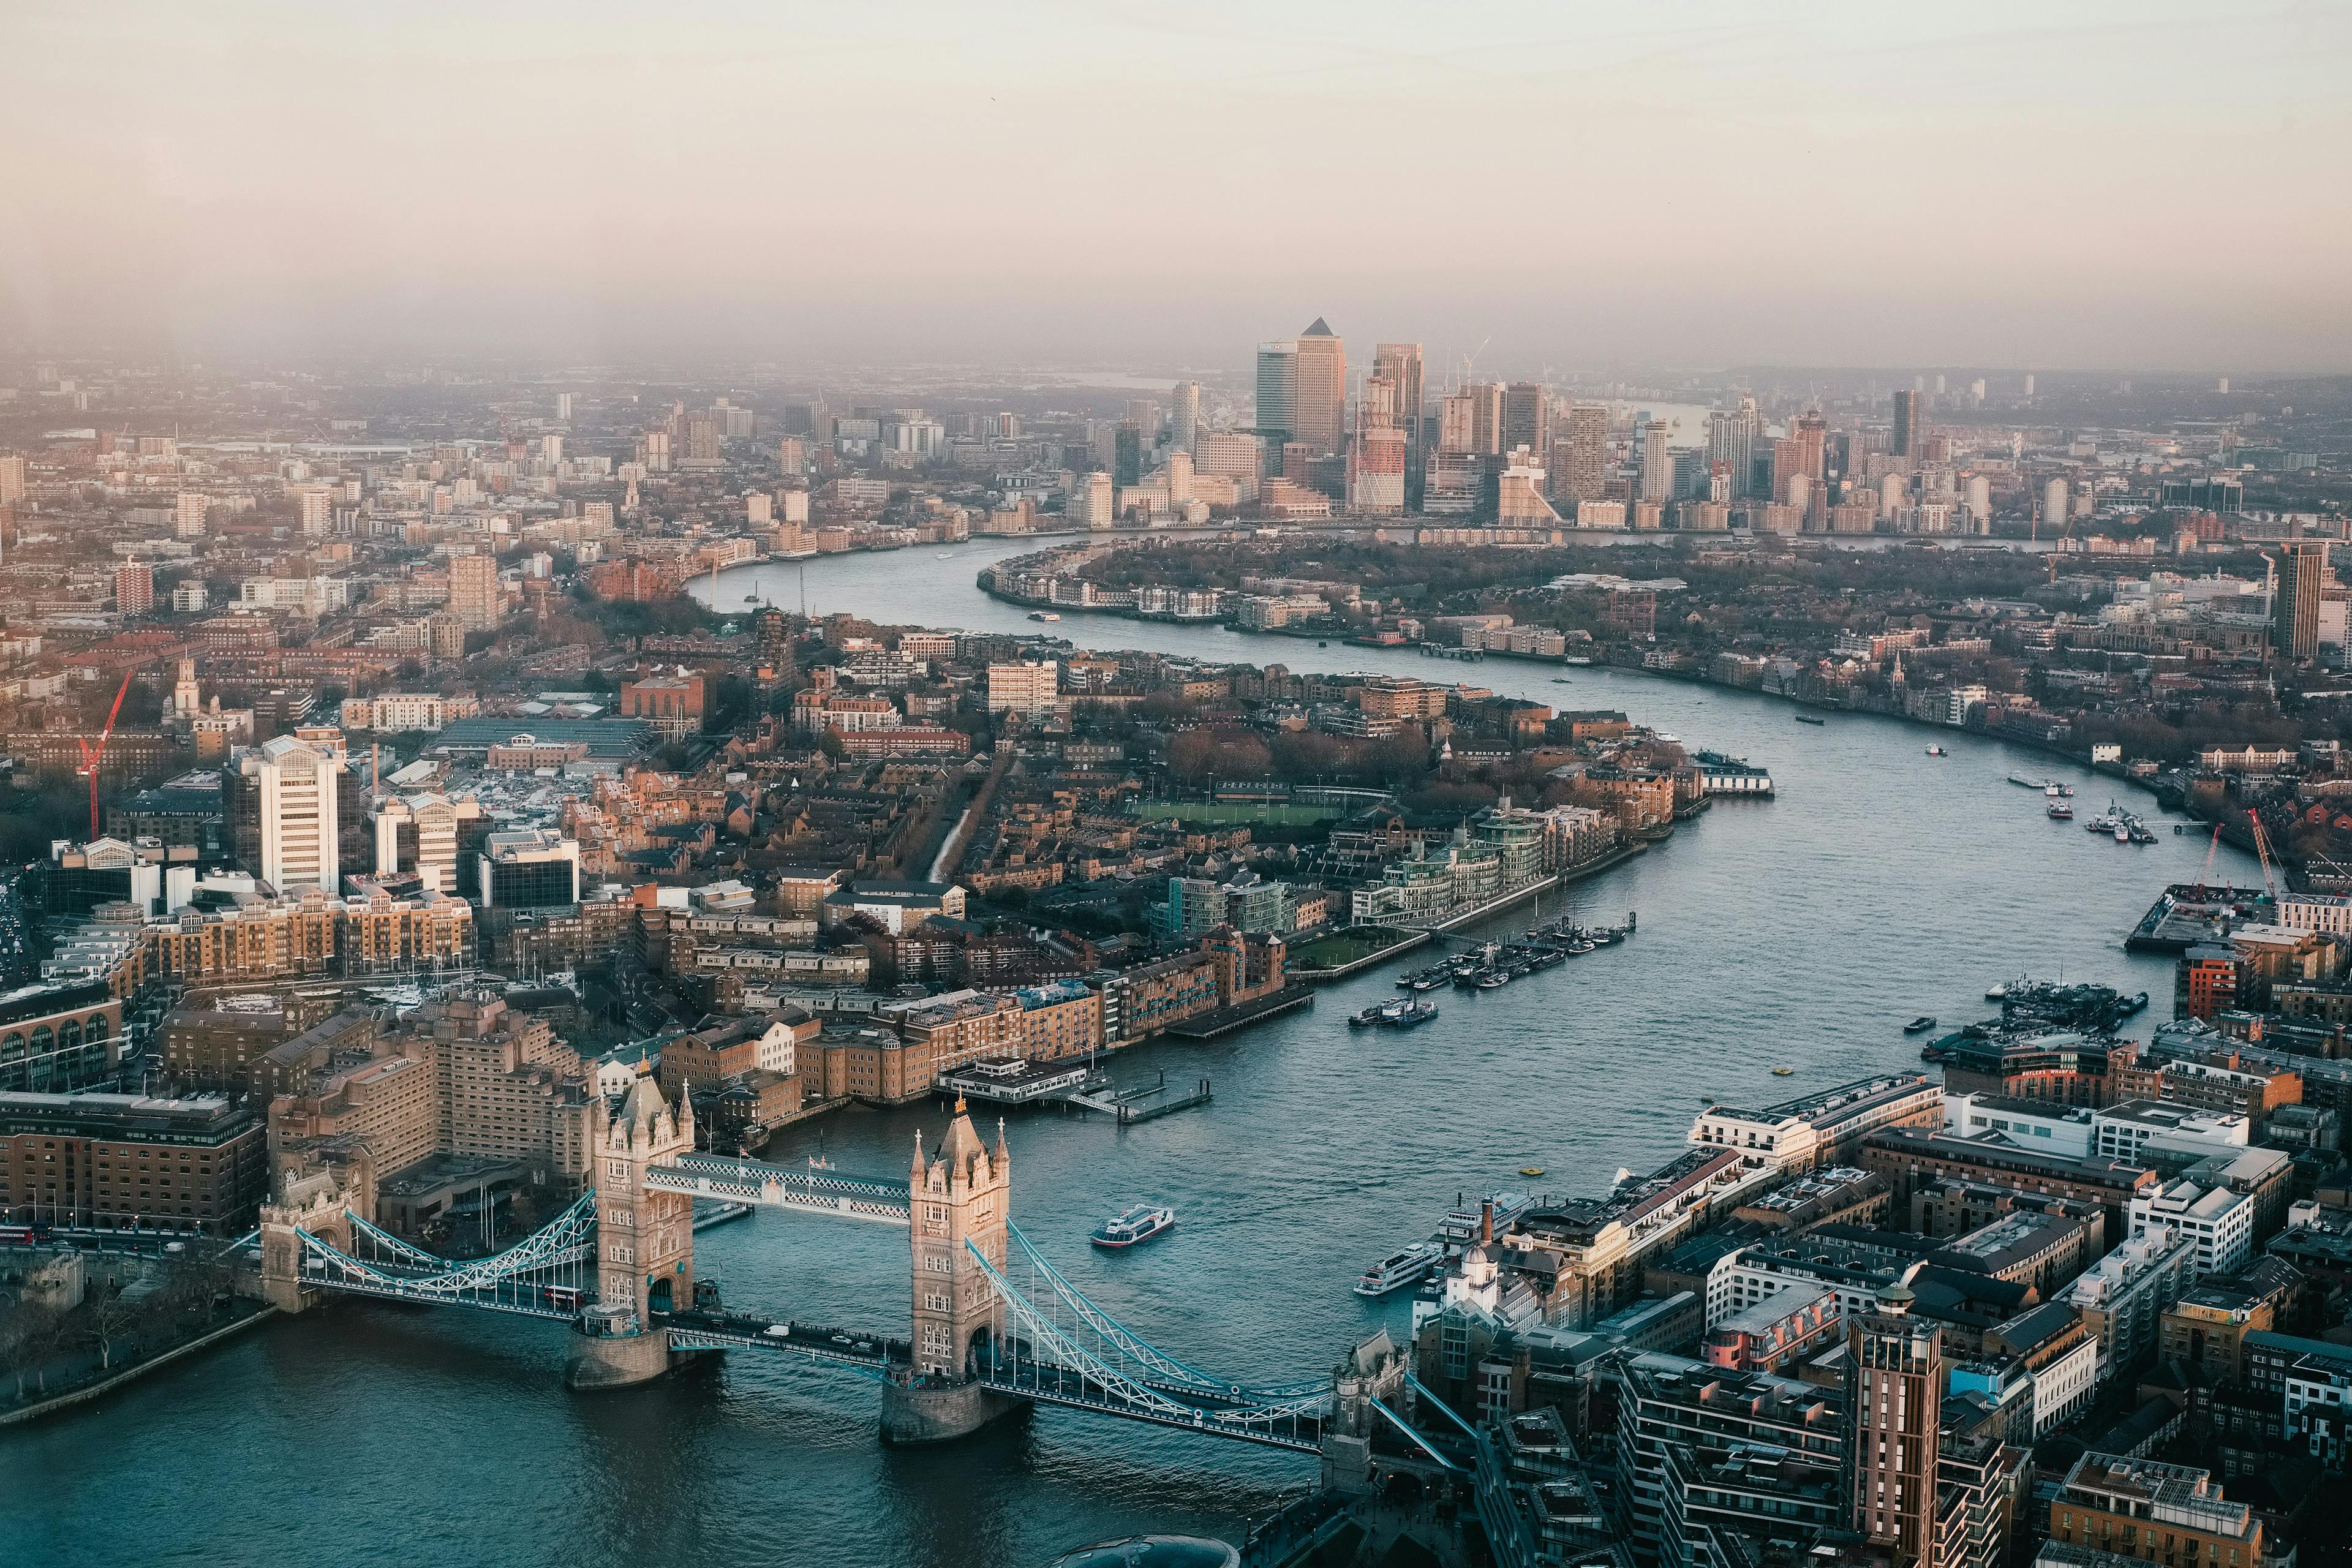 A view of River Thames in London. Photo from Benjamin Davies on Unsplash